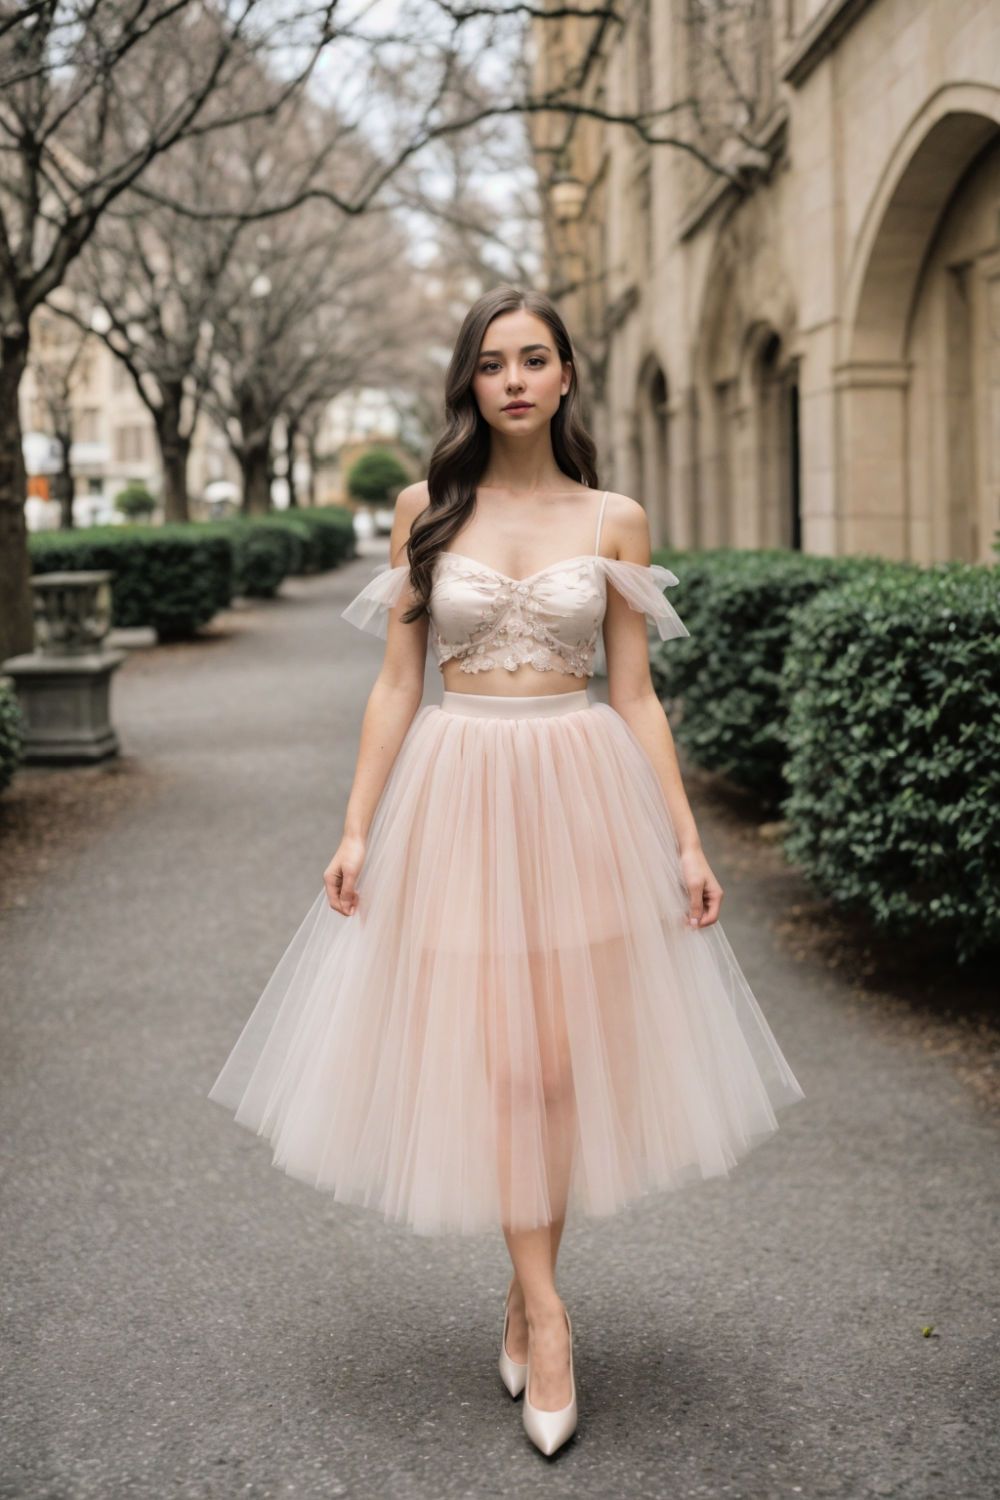 tulle skirt romantic and playful outfit